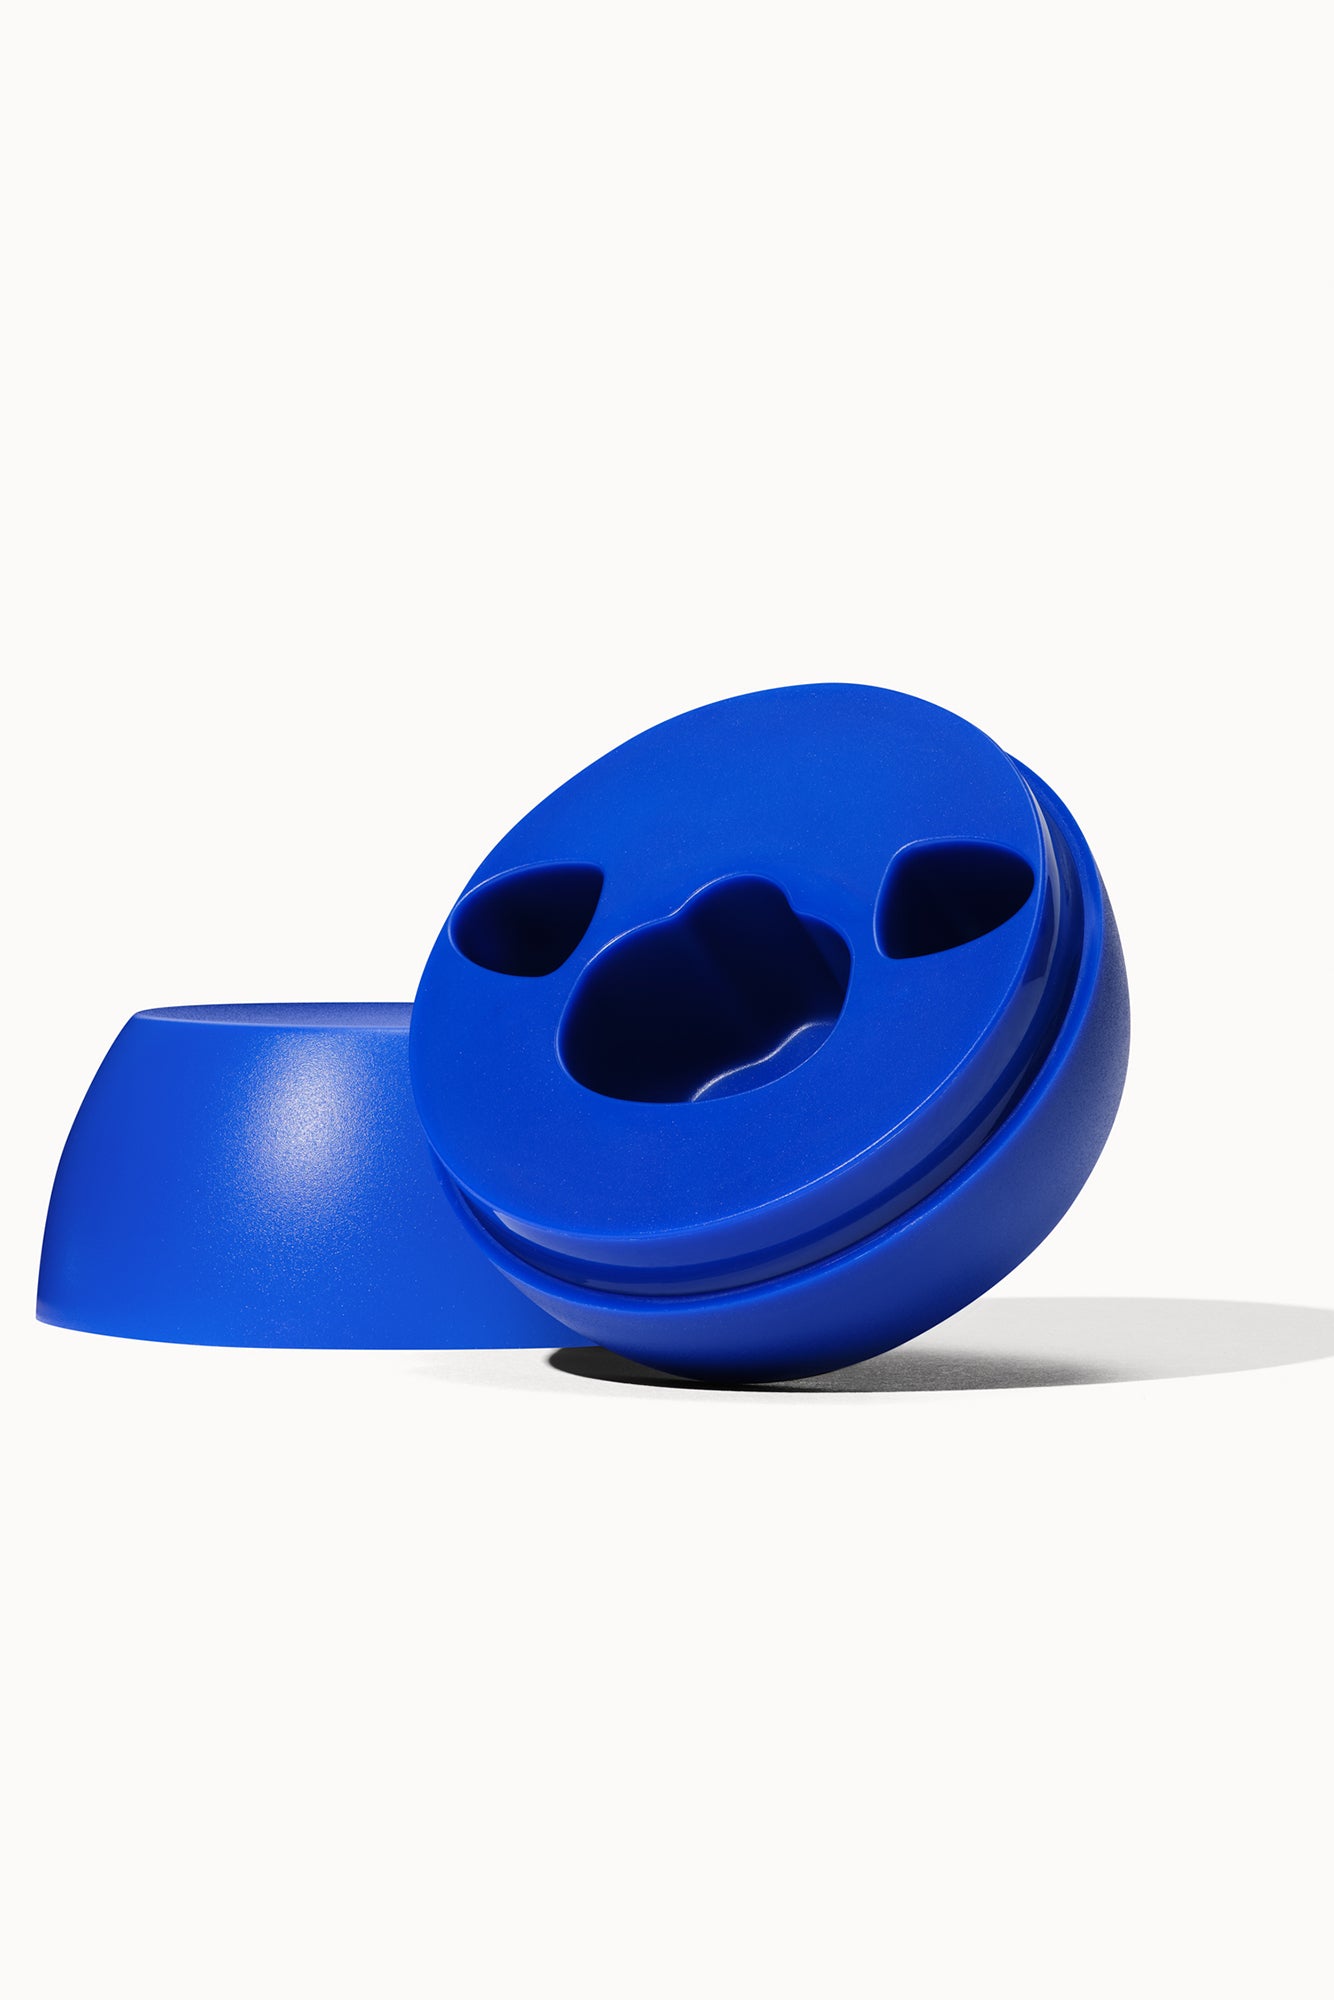 Blue charging base for Eva sex toy, on off-white background.